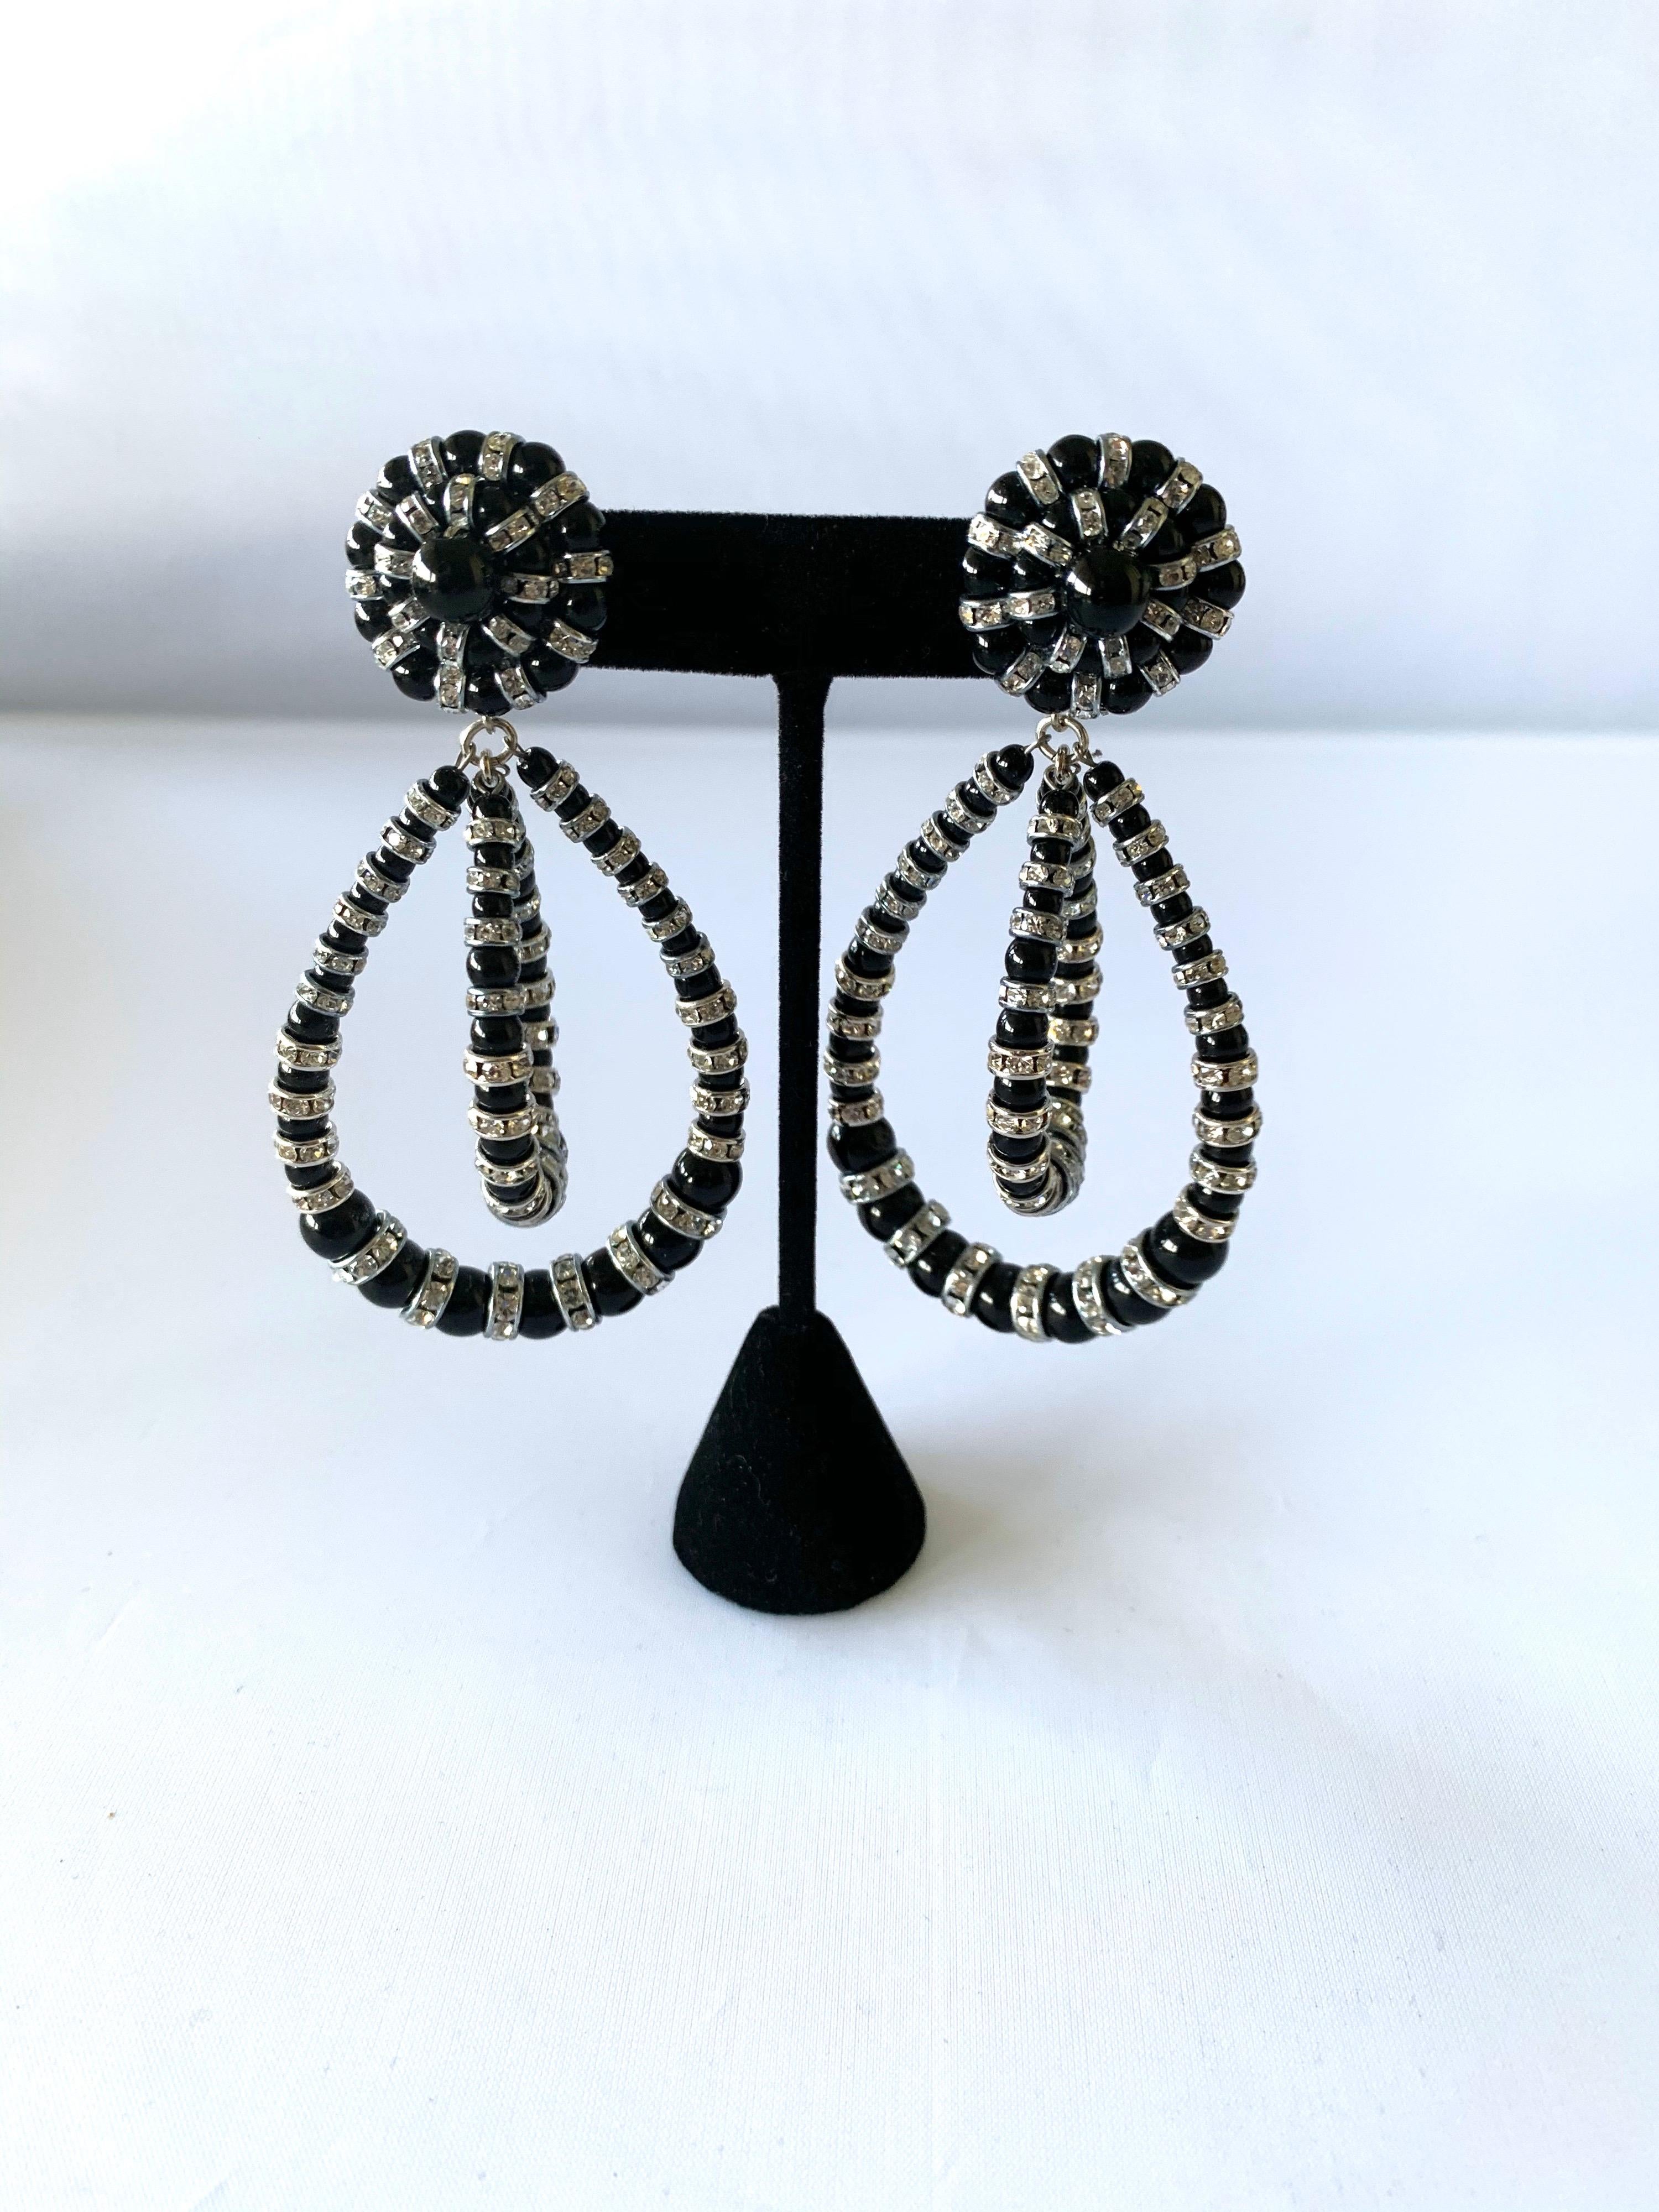 XL Contemporary handmade turquoise architectural Swarovski crystal statement earrings - the clip-on earrings feature two double hoops with handmade black glass beads and clear Swarovski crystal rondelles. Made in Paris France, by F. Montague.